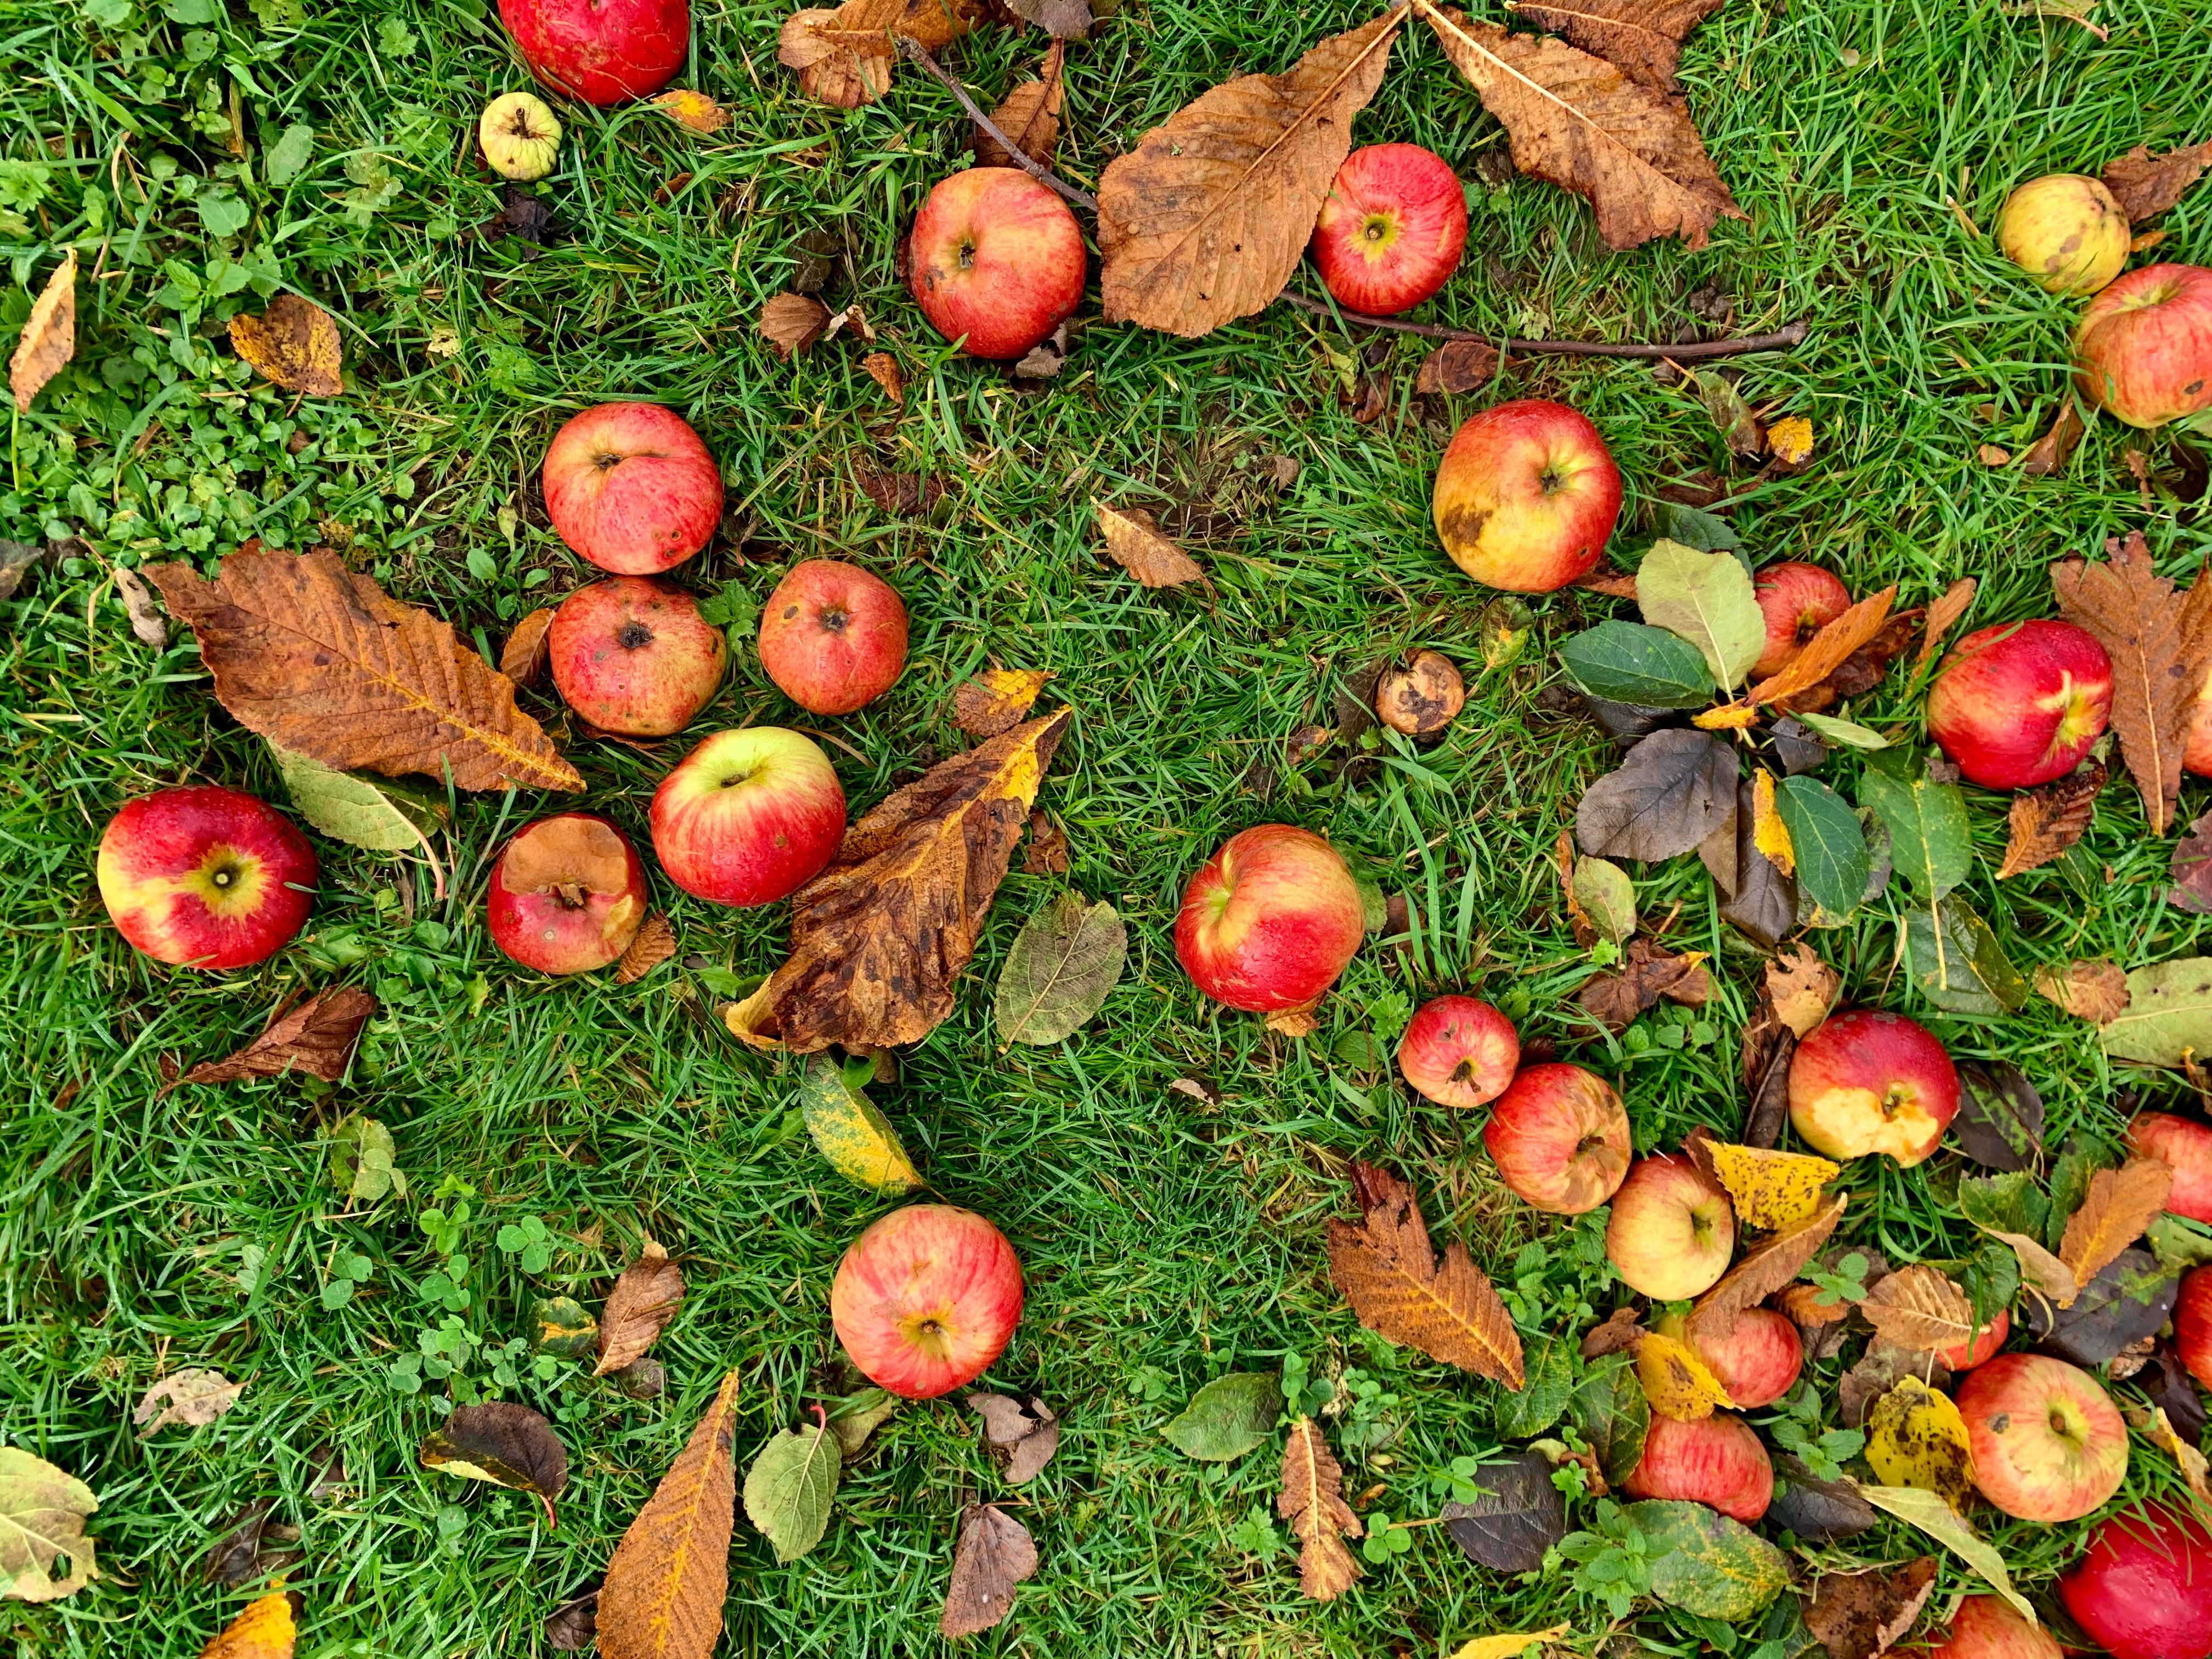 Since he wanted to lure a moose, Mike tossed a crate full of apples on the ground. | Source: Unsplash